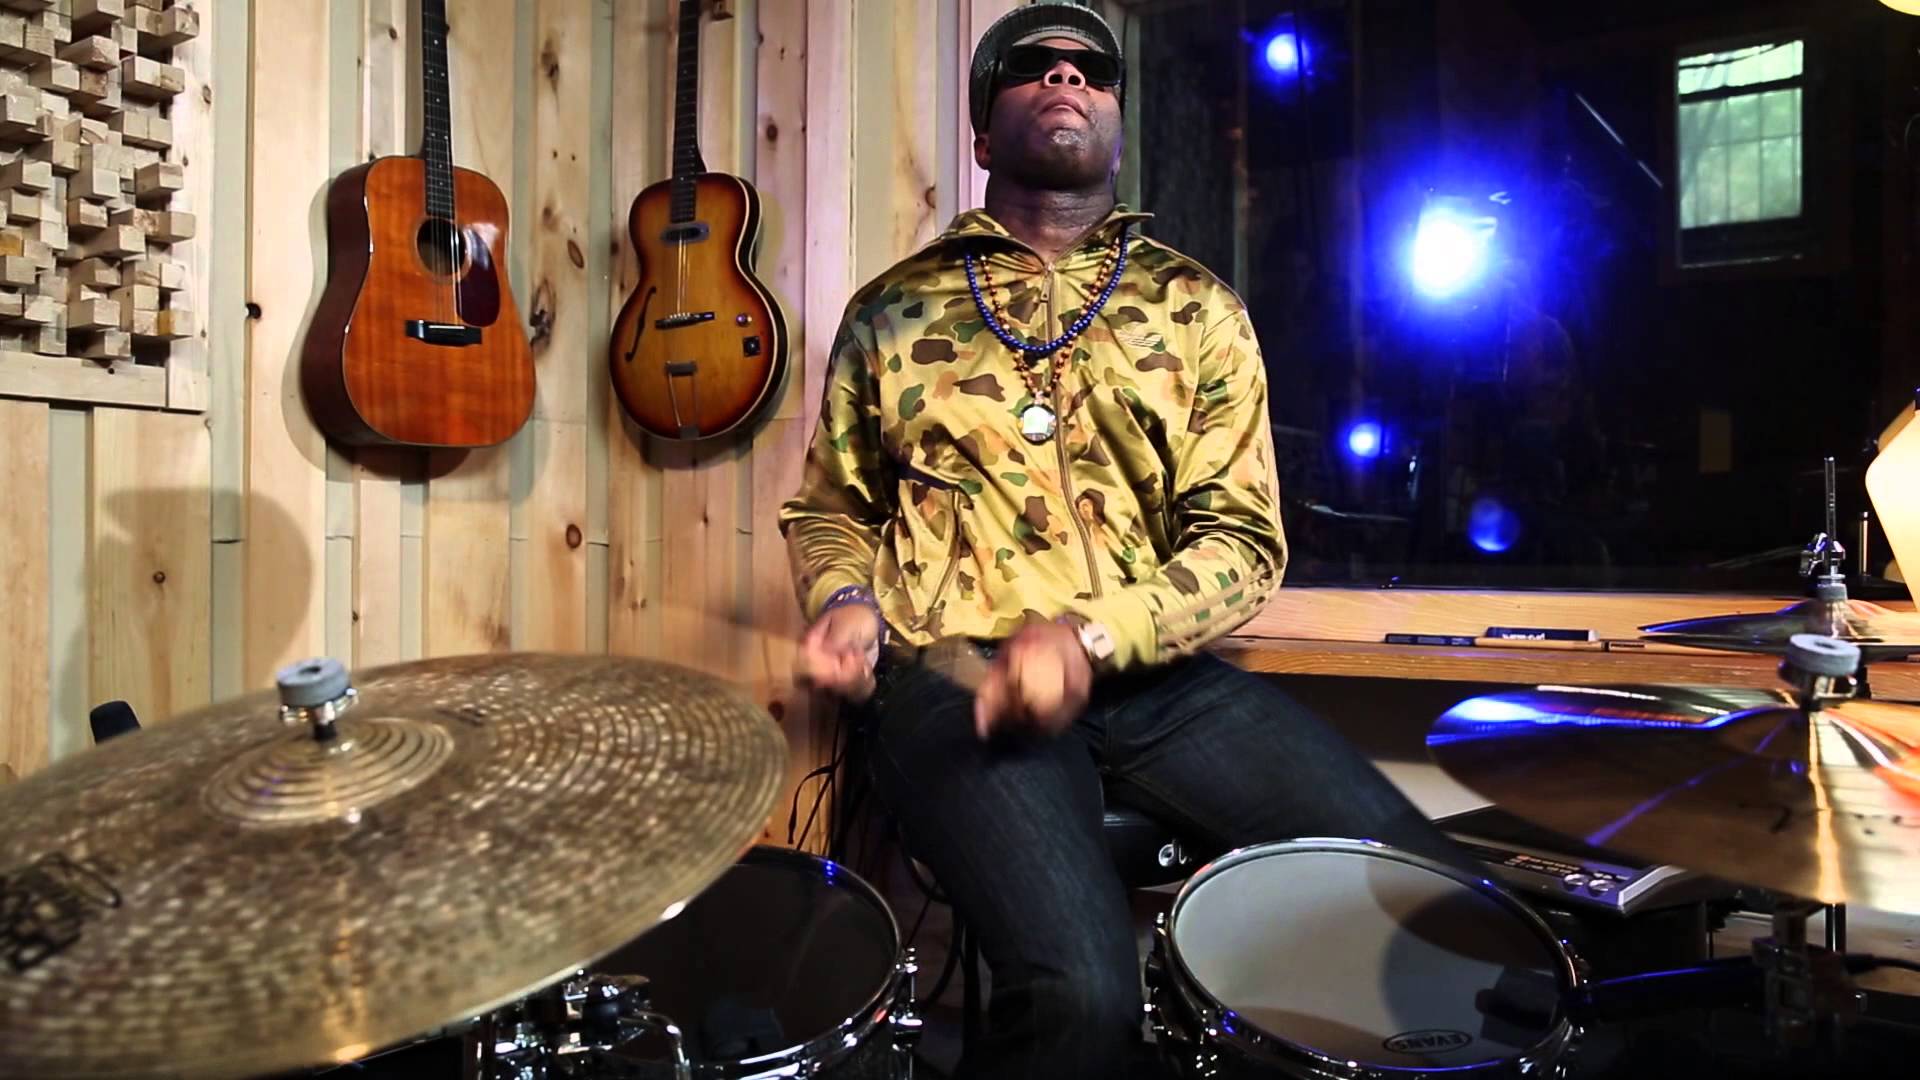 DARU JONES: I am a positive example in this dying music business